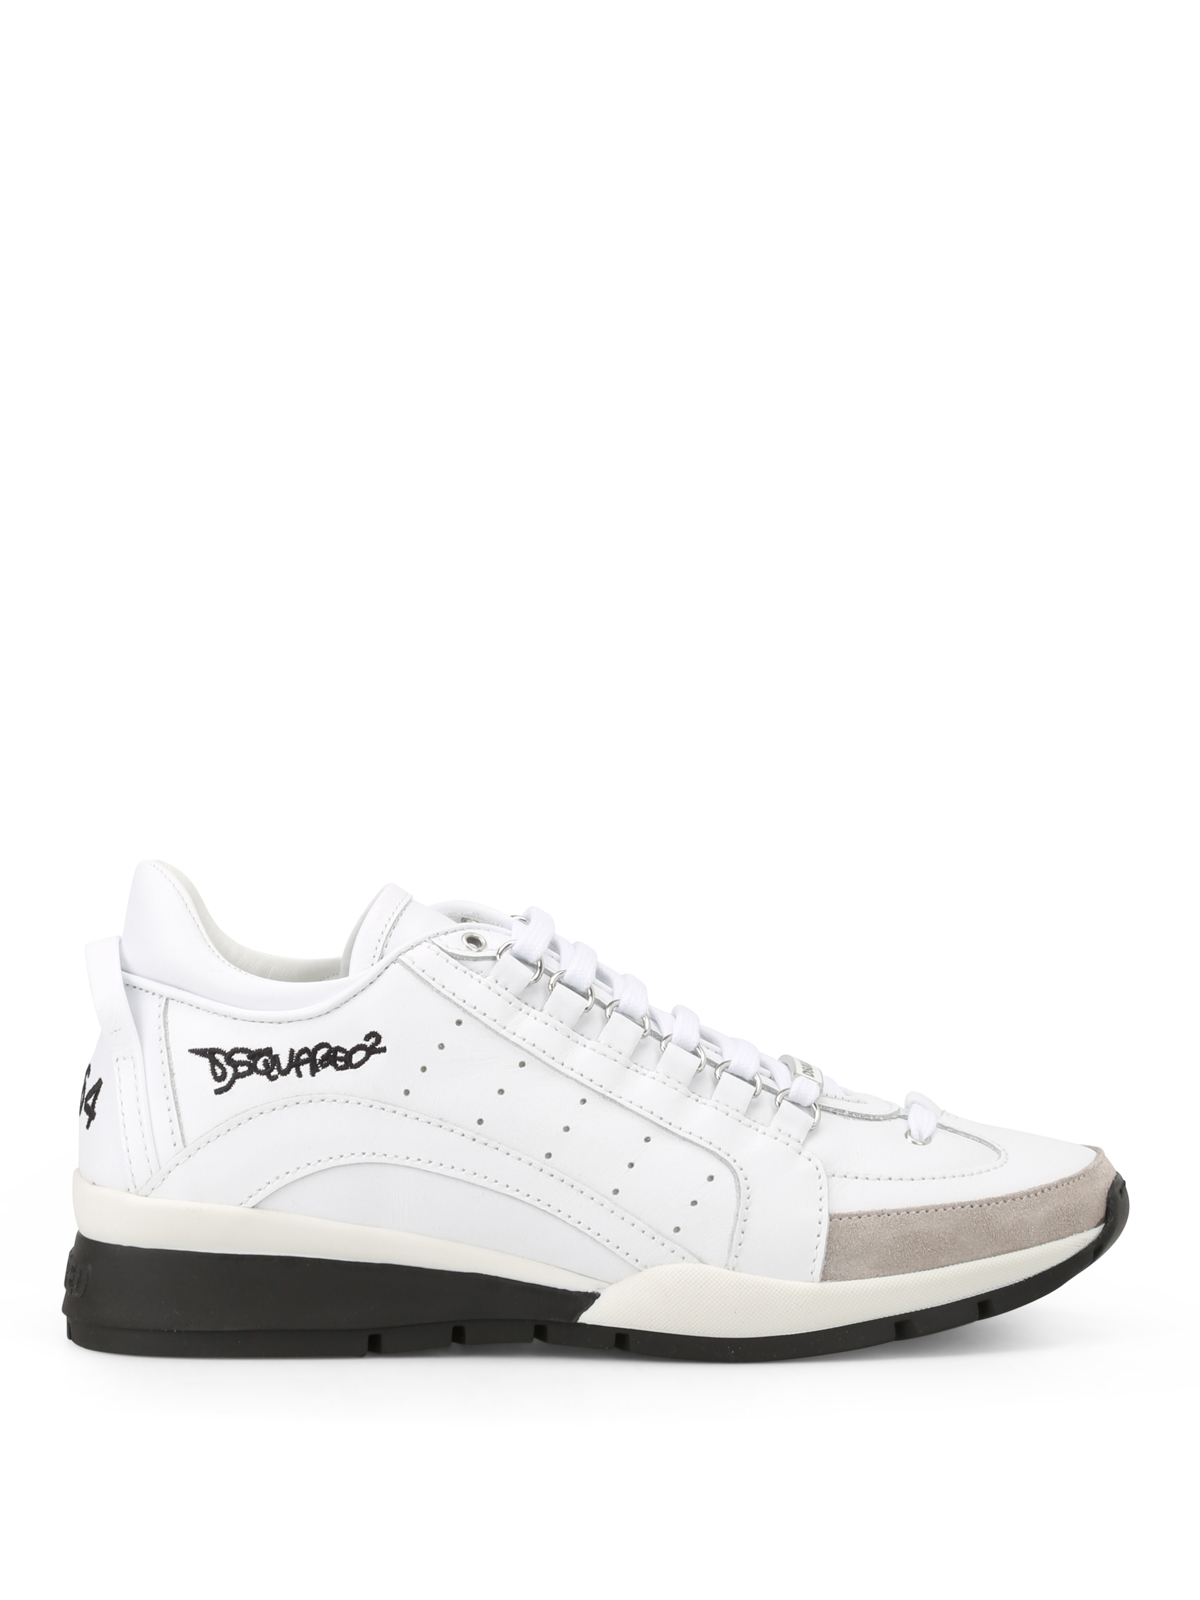 Dsquared2 - 551 white leather sneakers 